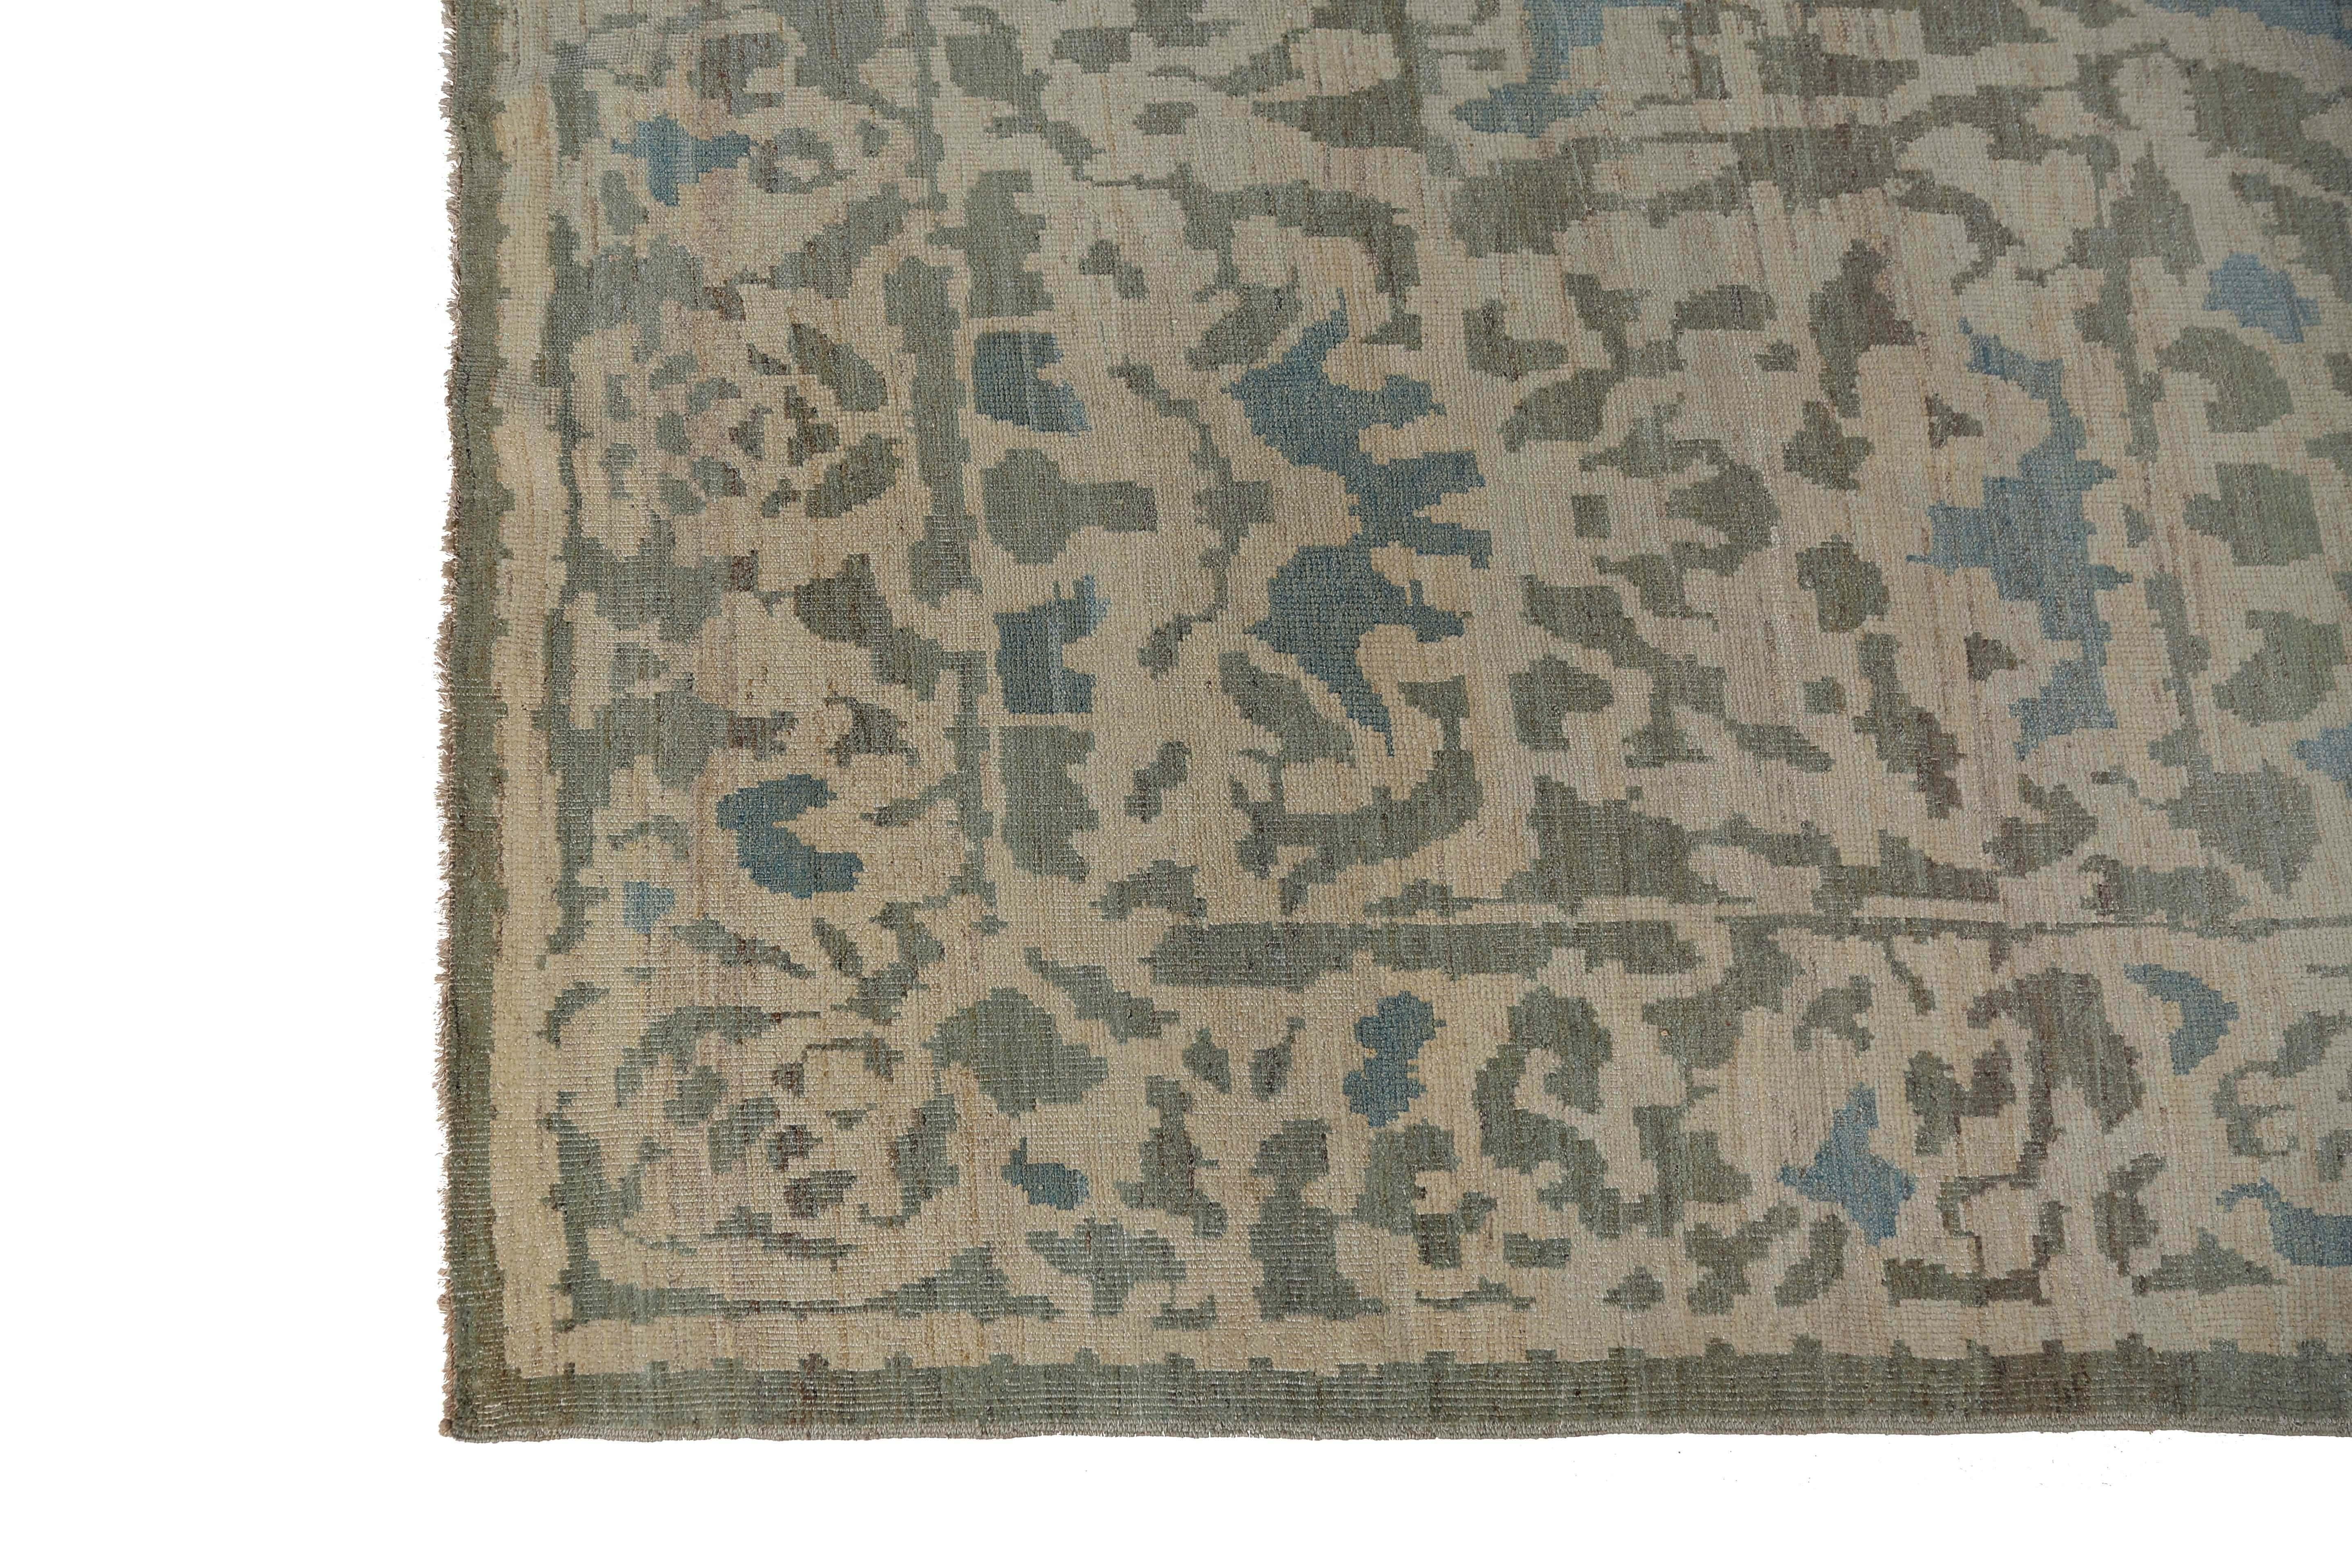 Introducing our exquisite handmade Sultanabad rug, measuring 9'8